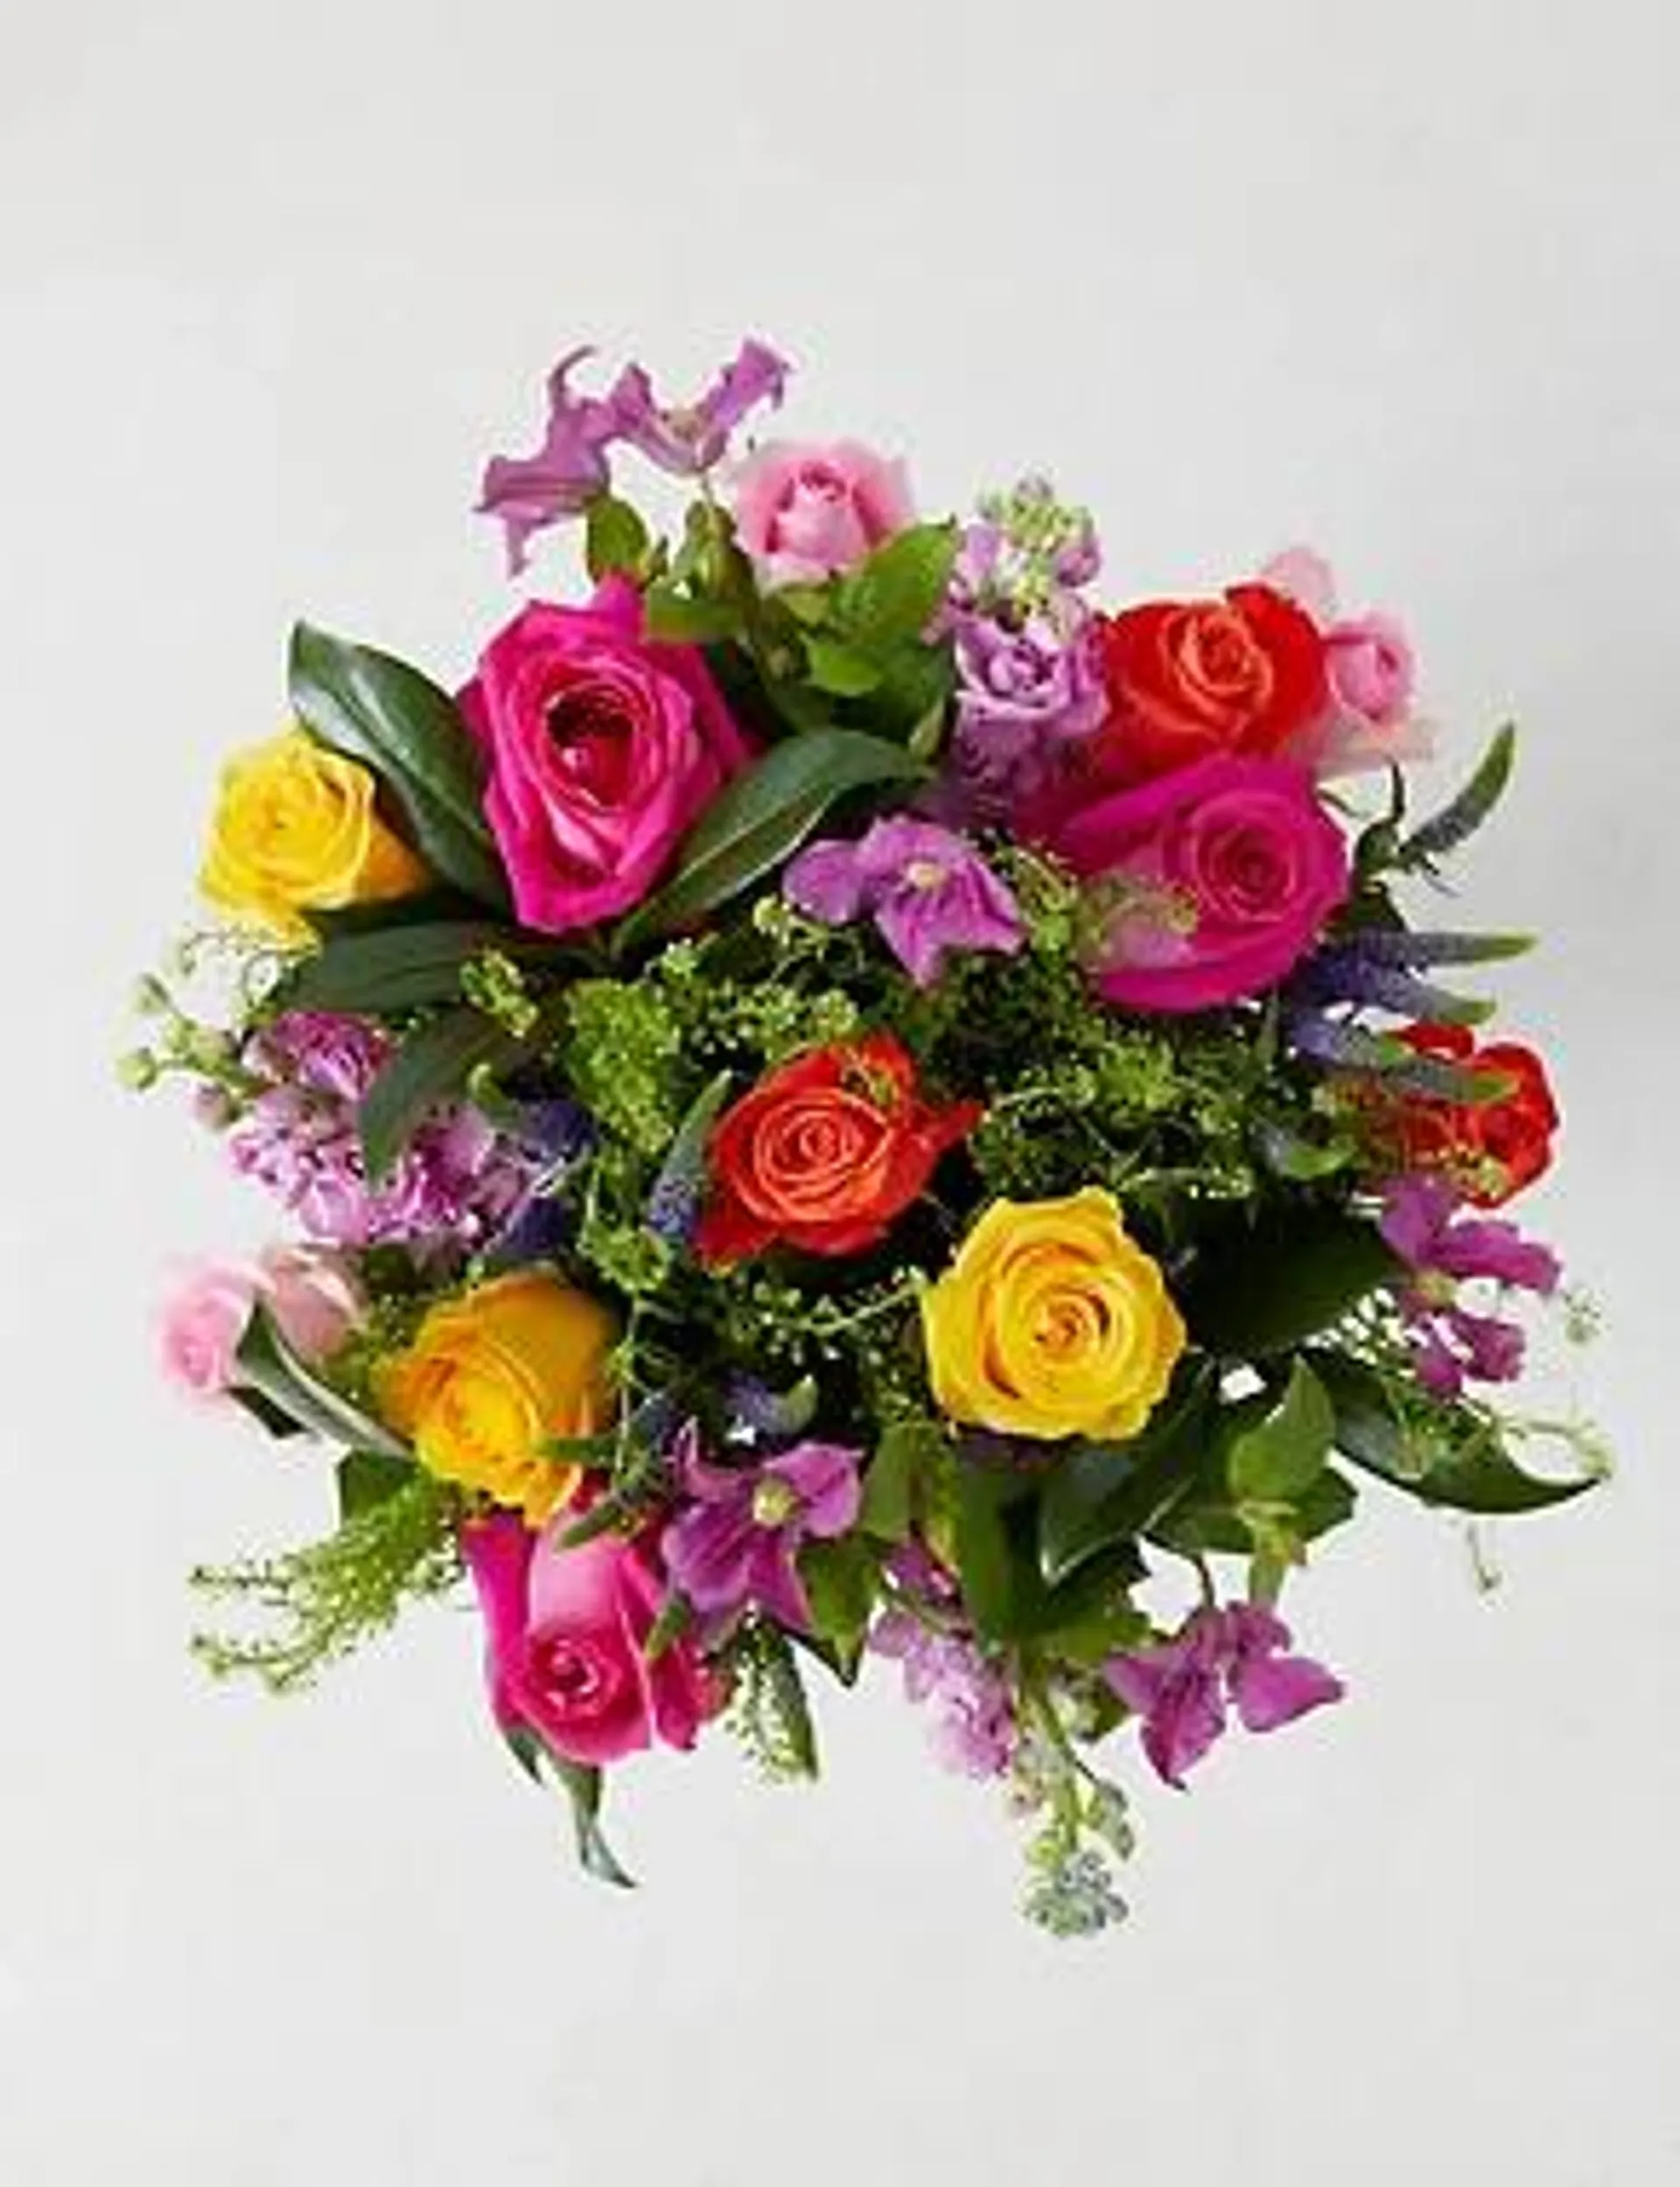 Roses, Stocks & Clematis Bright Bouquet